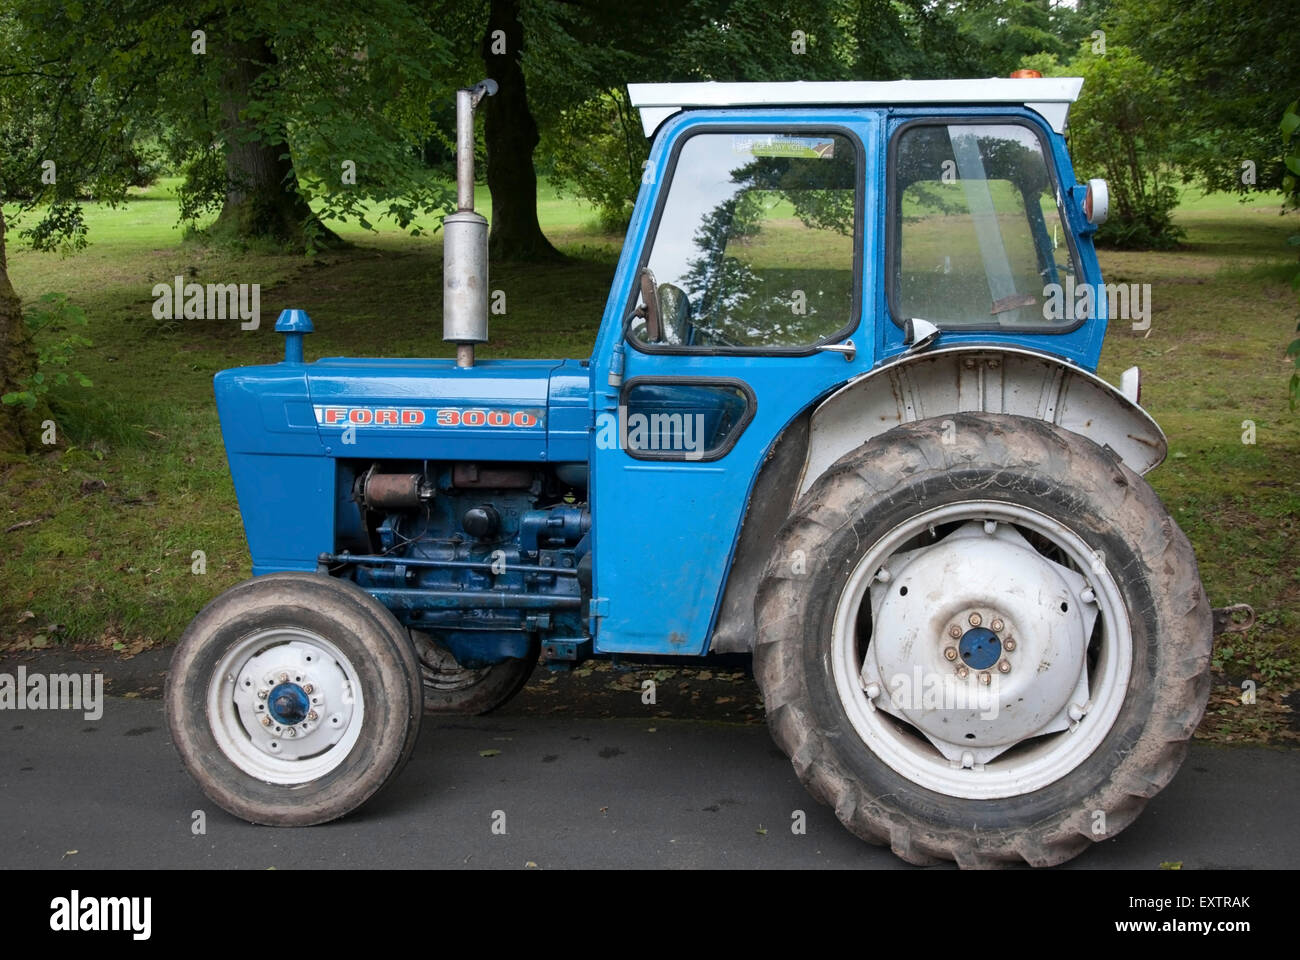 1974 Blue & White Ford 3000 Series Farm Tractor Stock Photo